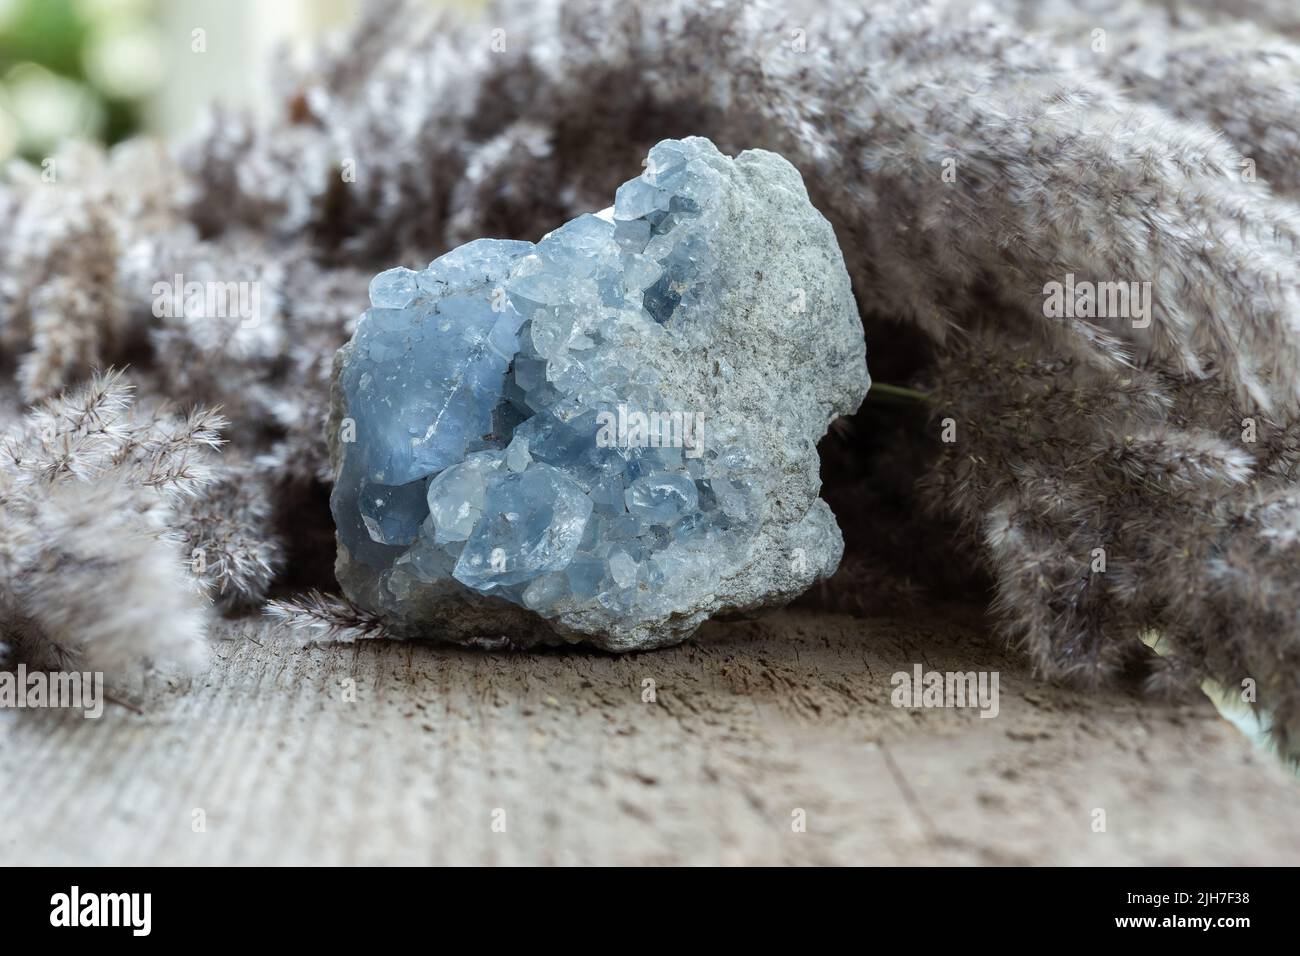 Blue Celestine or Celestite Stone mineral gemstone close up on wooden background. Natural healing gems for collection or spiritual therapy. Stock Photo